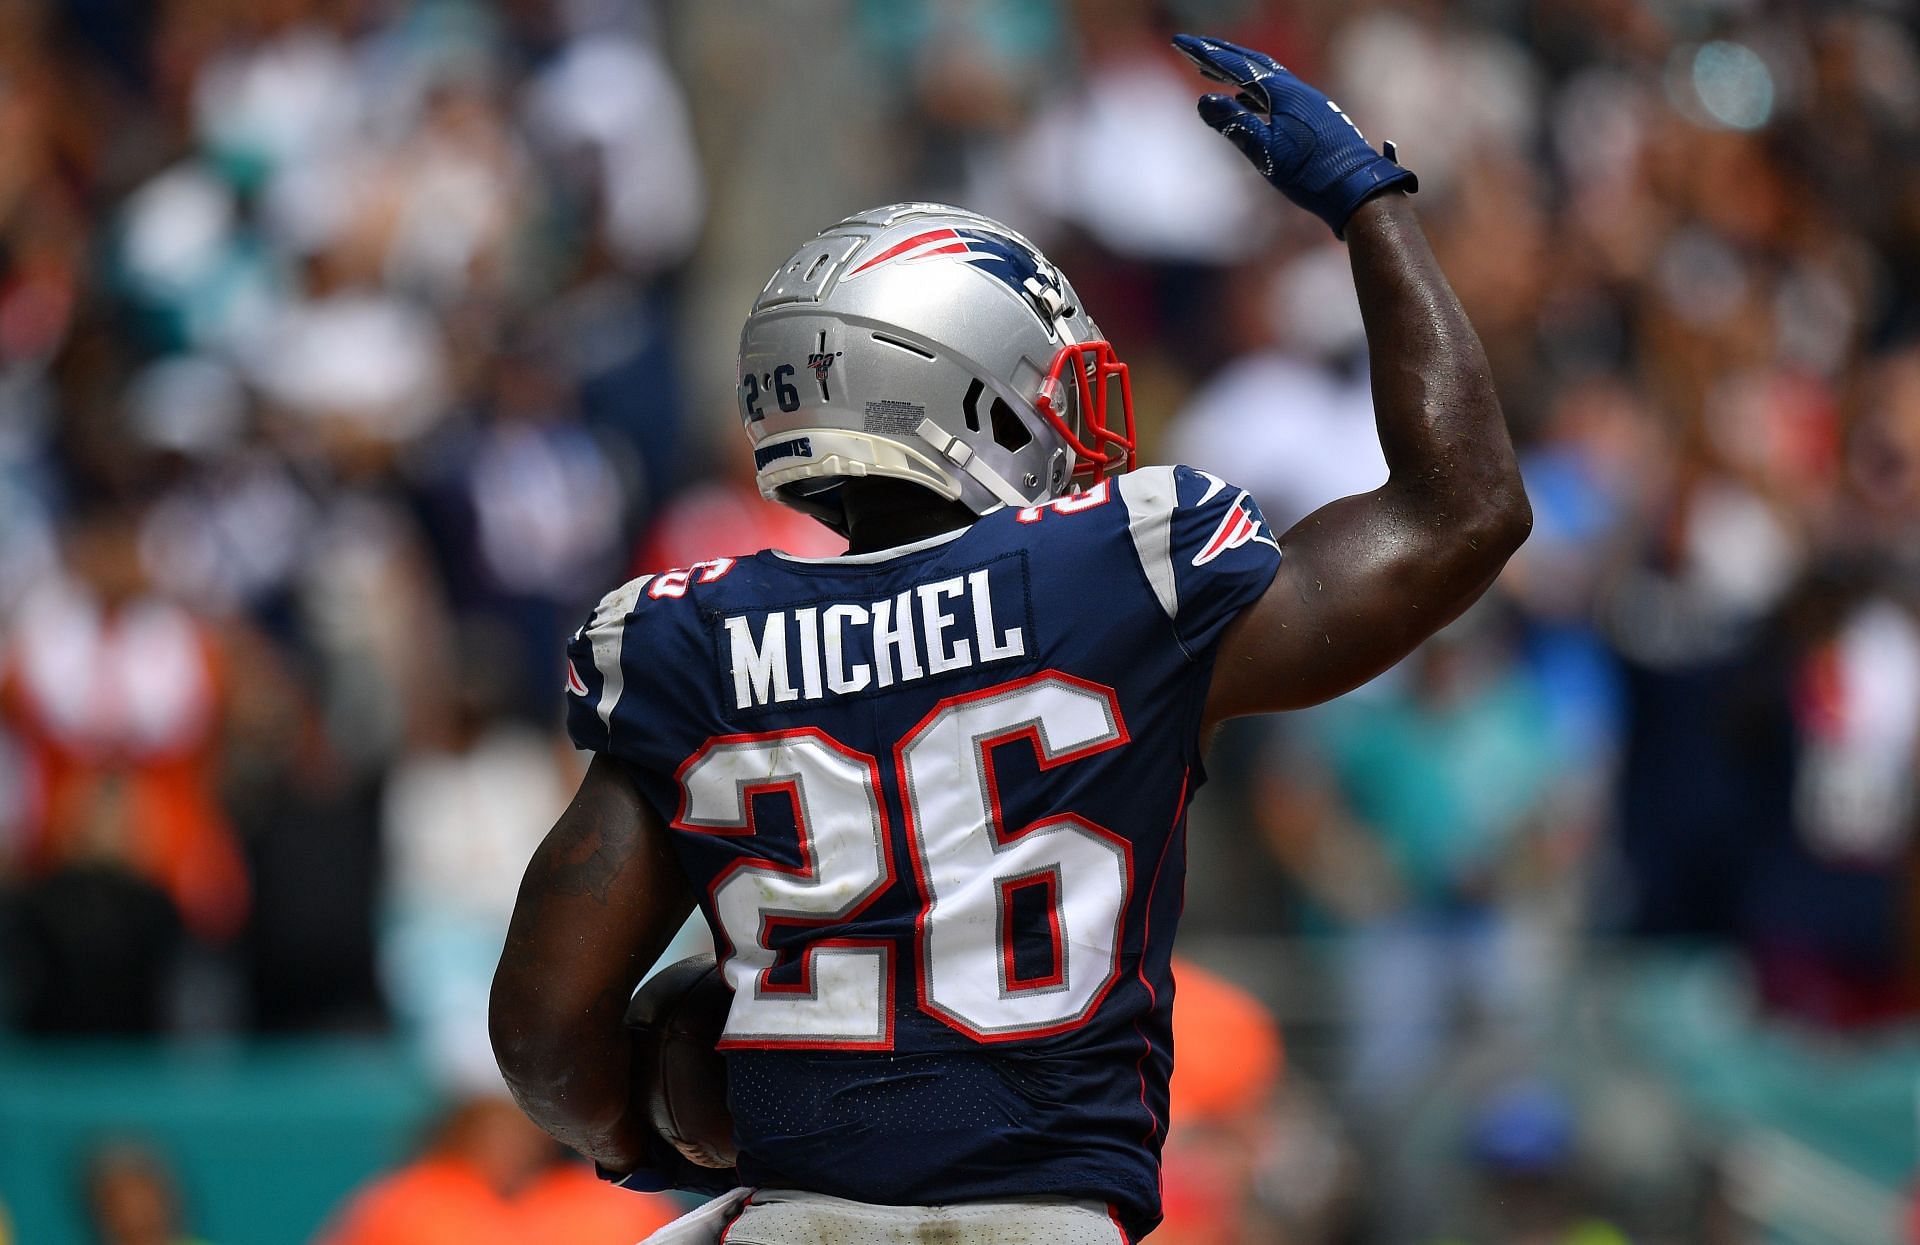 Sony Michel during New England Patriots v Miami Dolphins